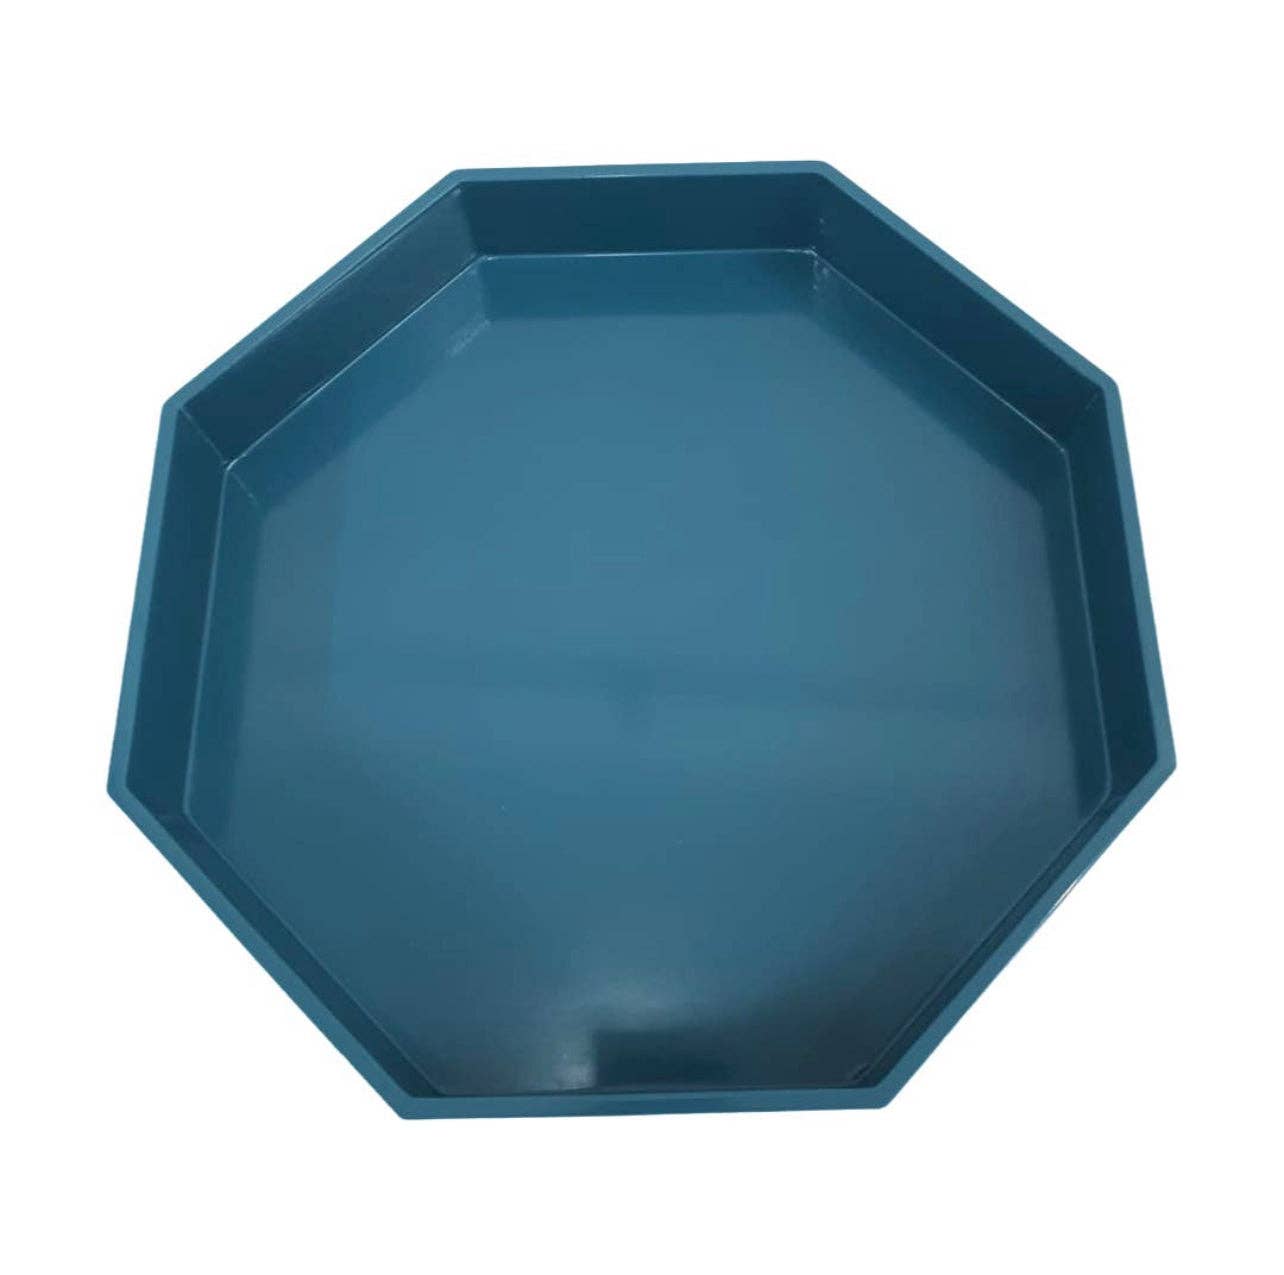 Large Octagonal Lacquered Tray, Peacock Blue